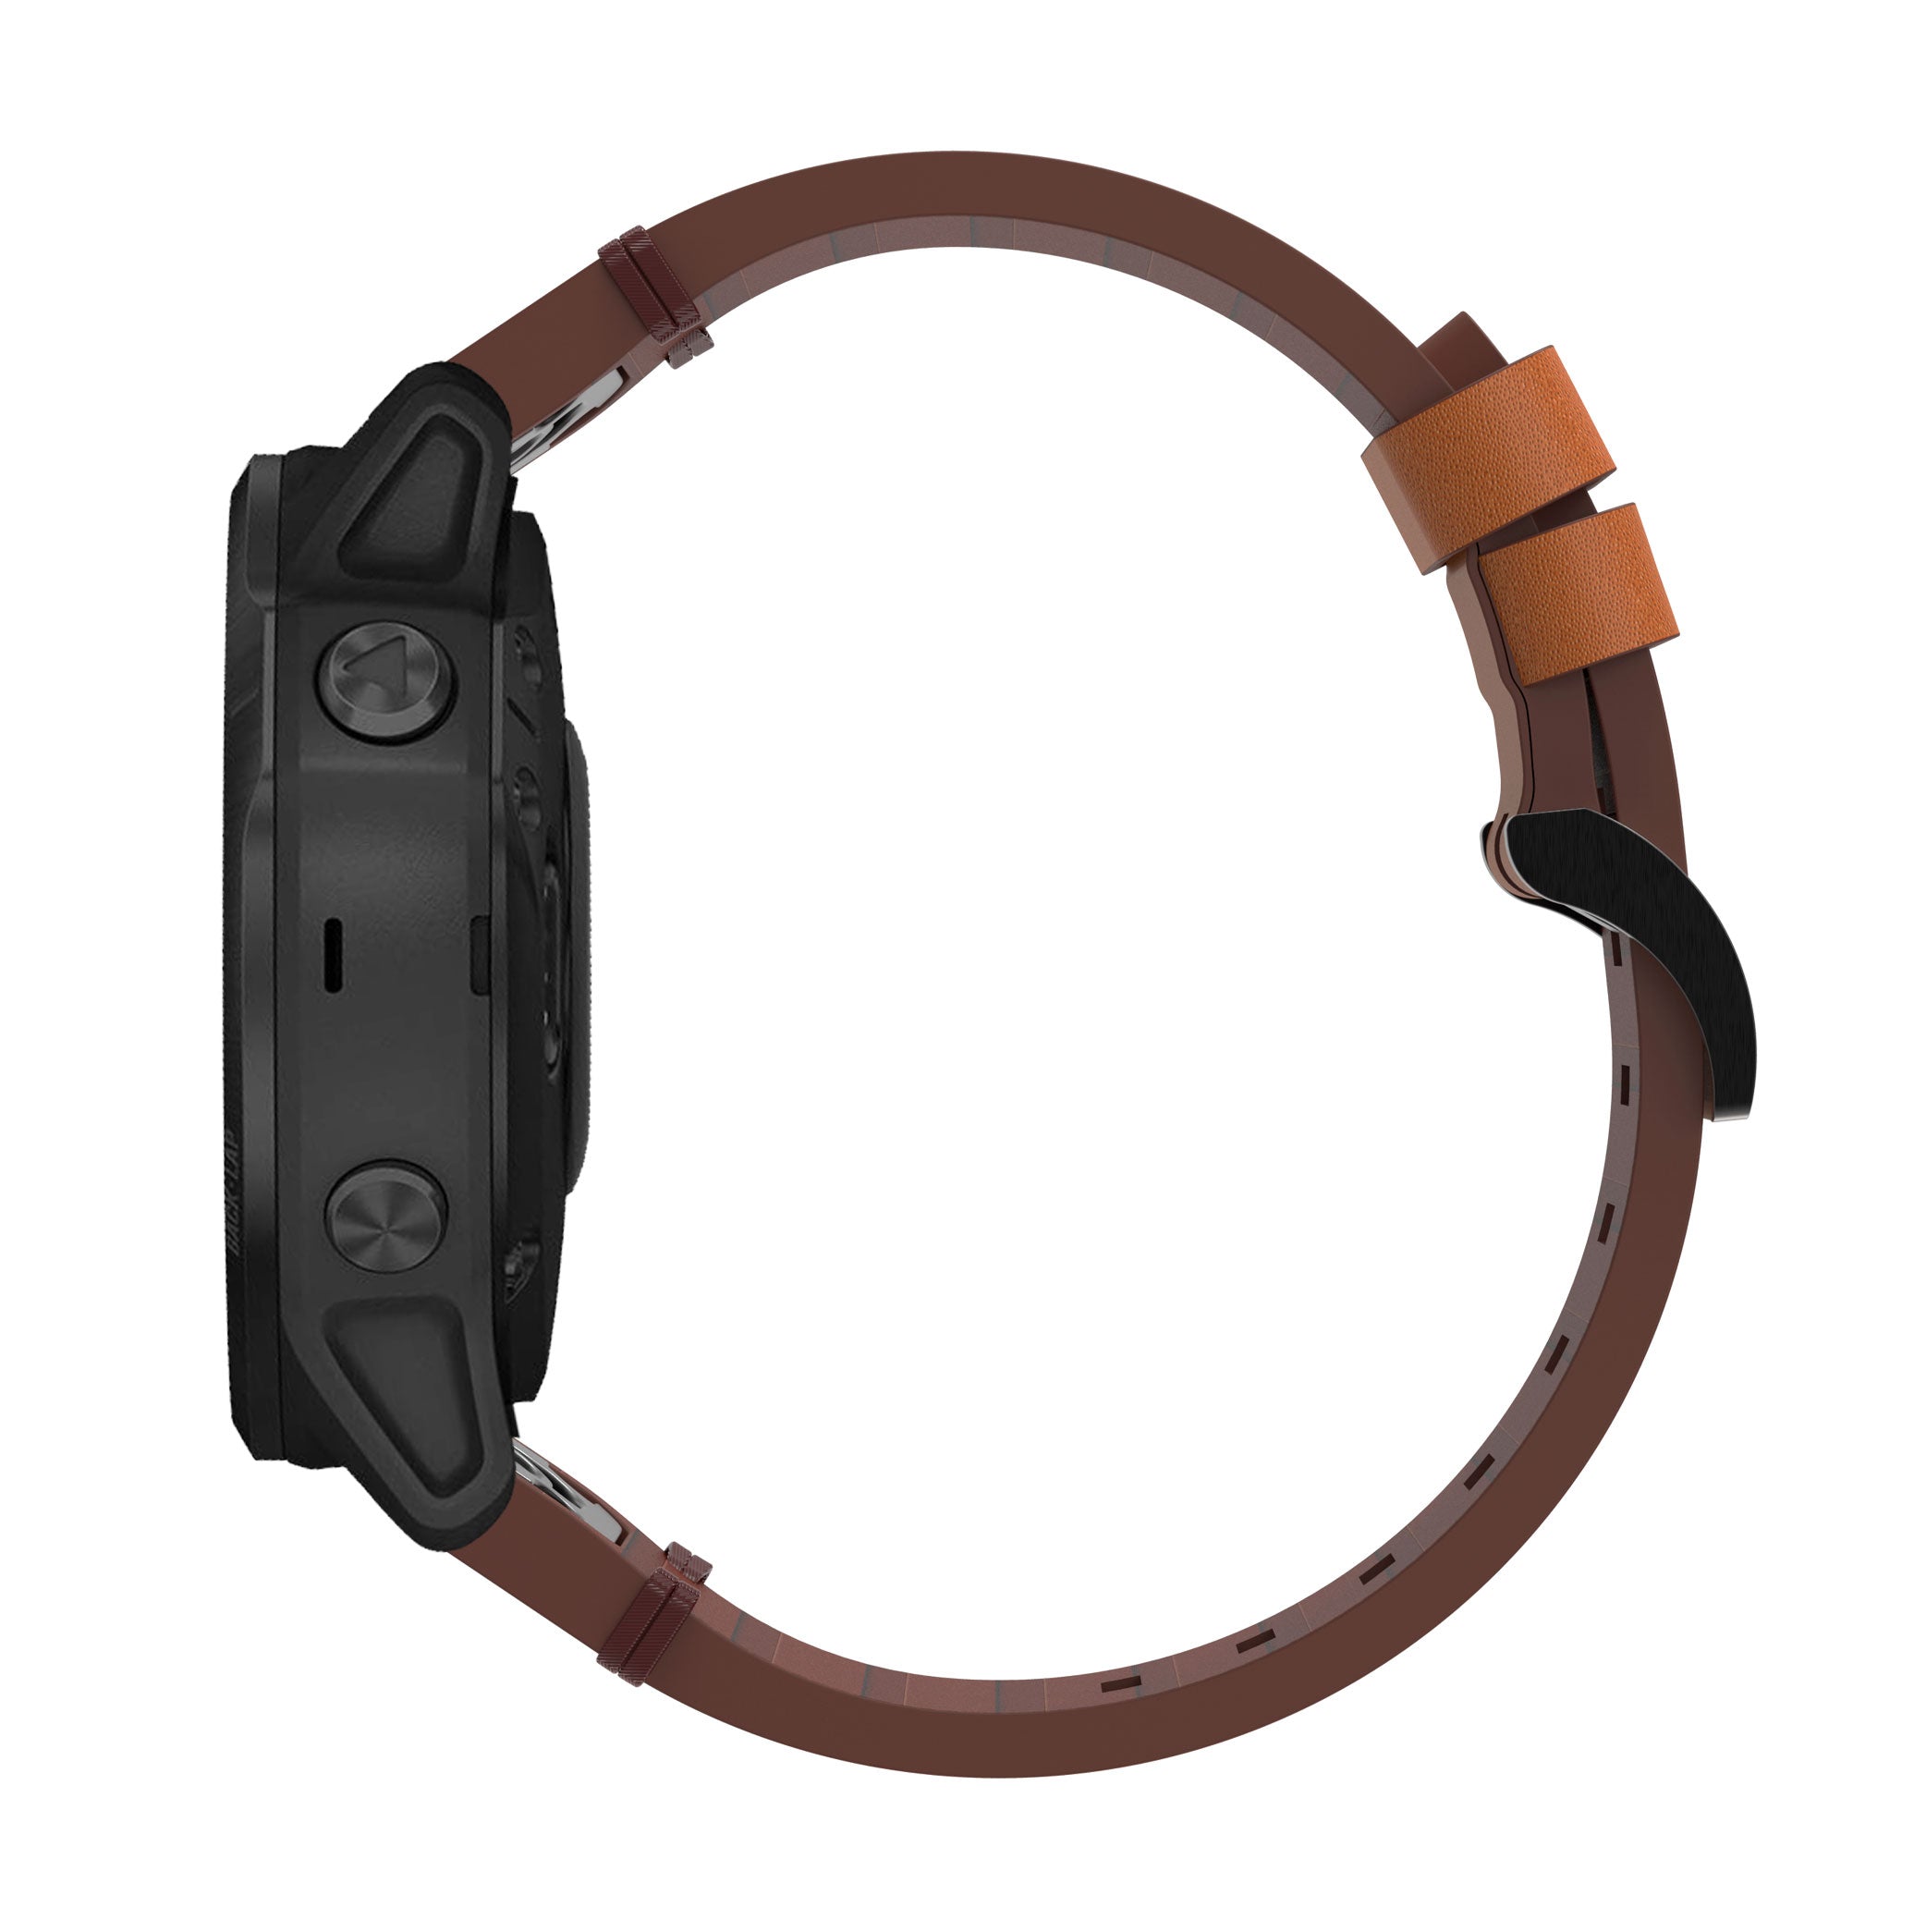 For Garmin Fenix 6S Genuine Leather Smart Watch Band Adjustable Replacement Strap - Brown